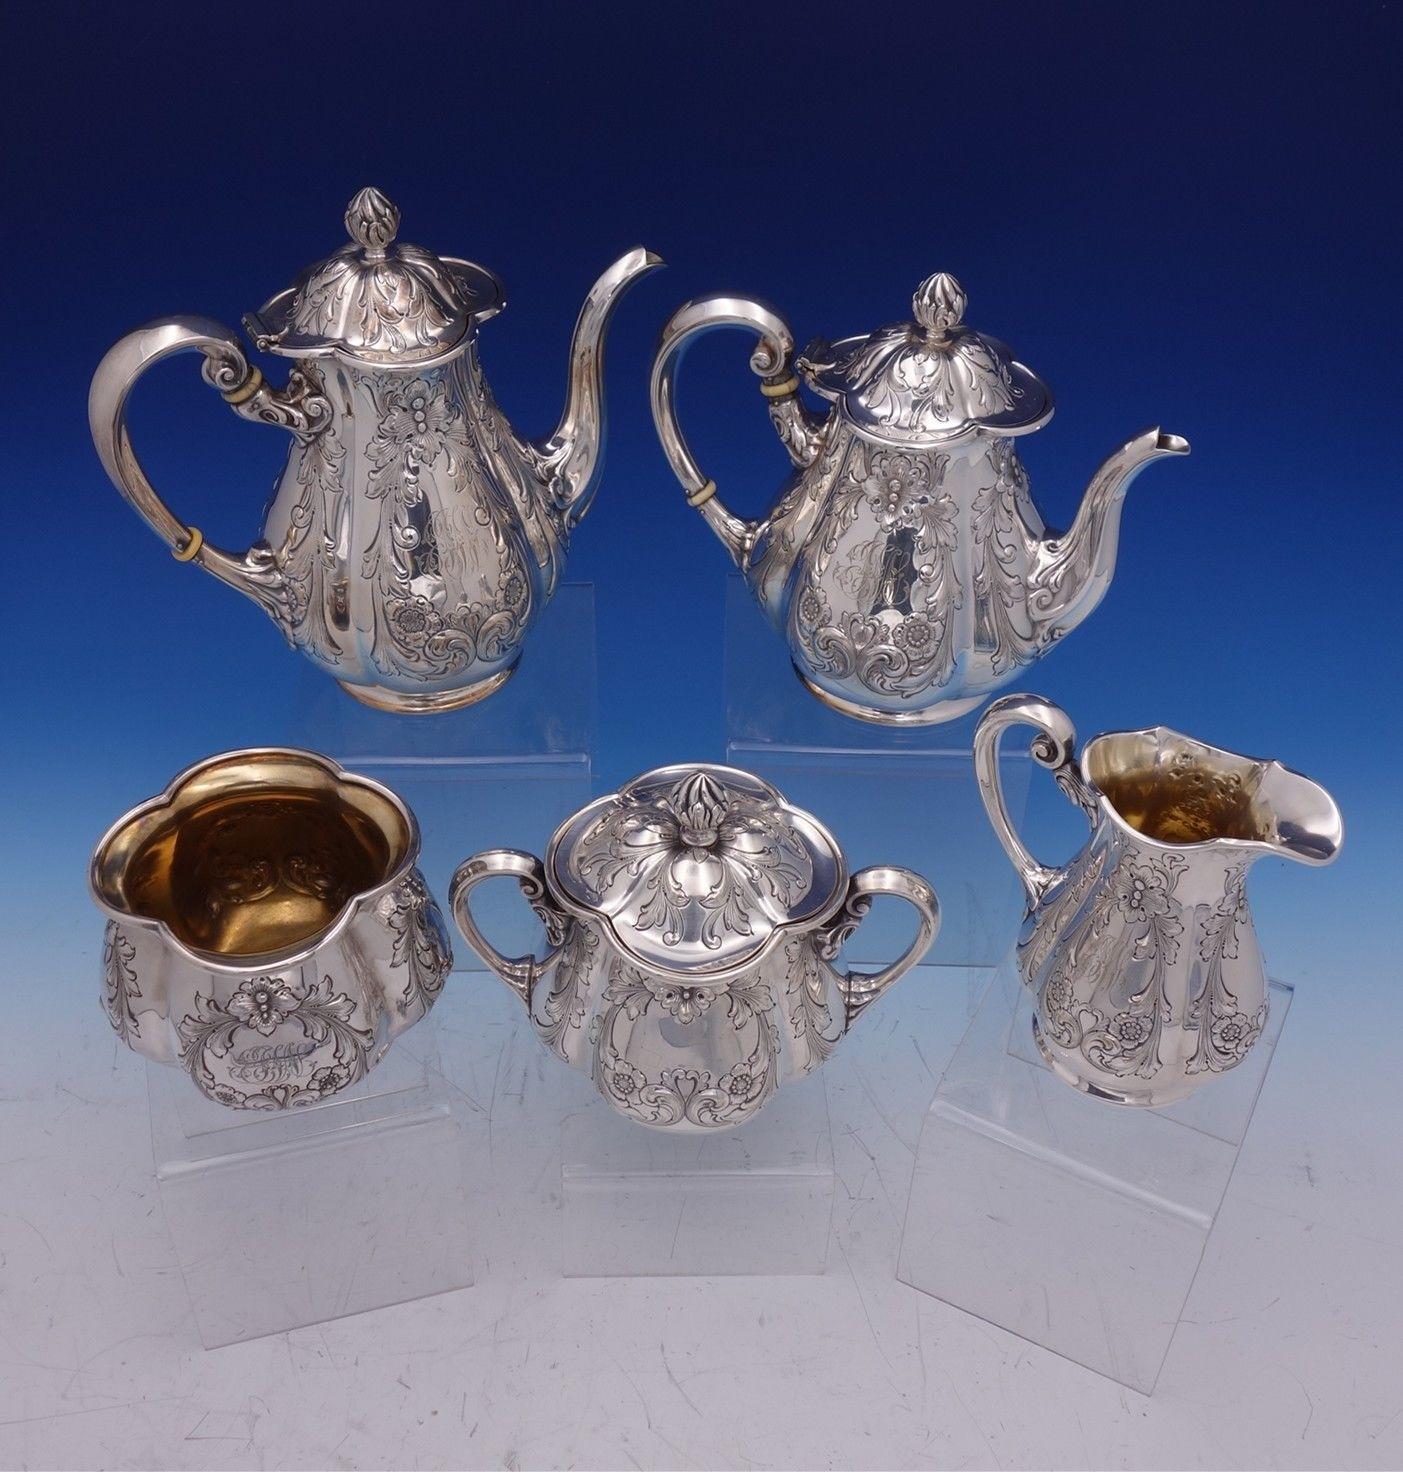 
Charming Poppy by Gorham silver plate 5-piece tea set. The pieces are marked #0352 and are monogrammed (see photos). This set includes:
One coffee pot: Measures 9 x 8 1/4 .
One tea pot: Measures 8 1/2 x 7 1/4 .
One sugar bowl (with lid):